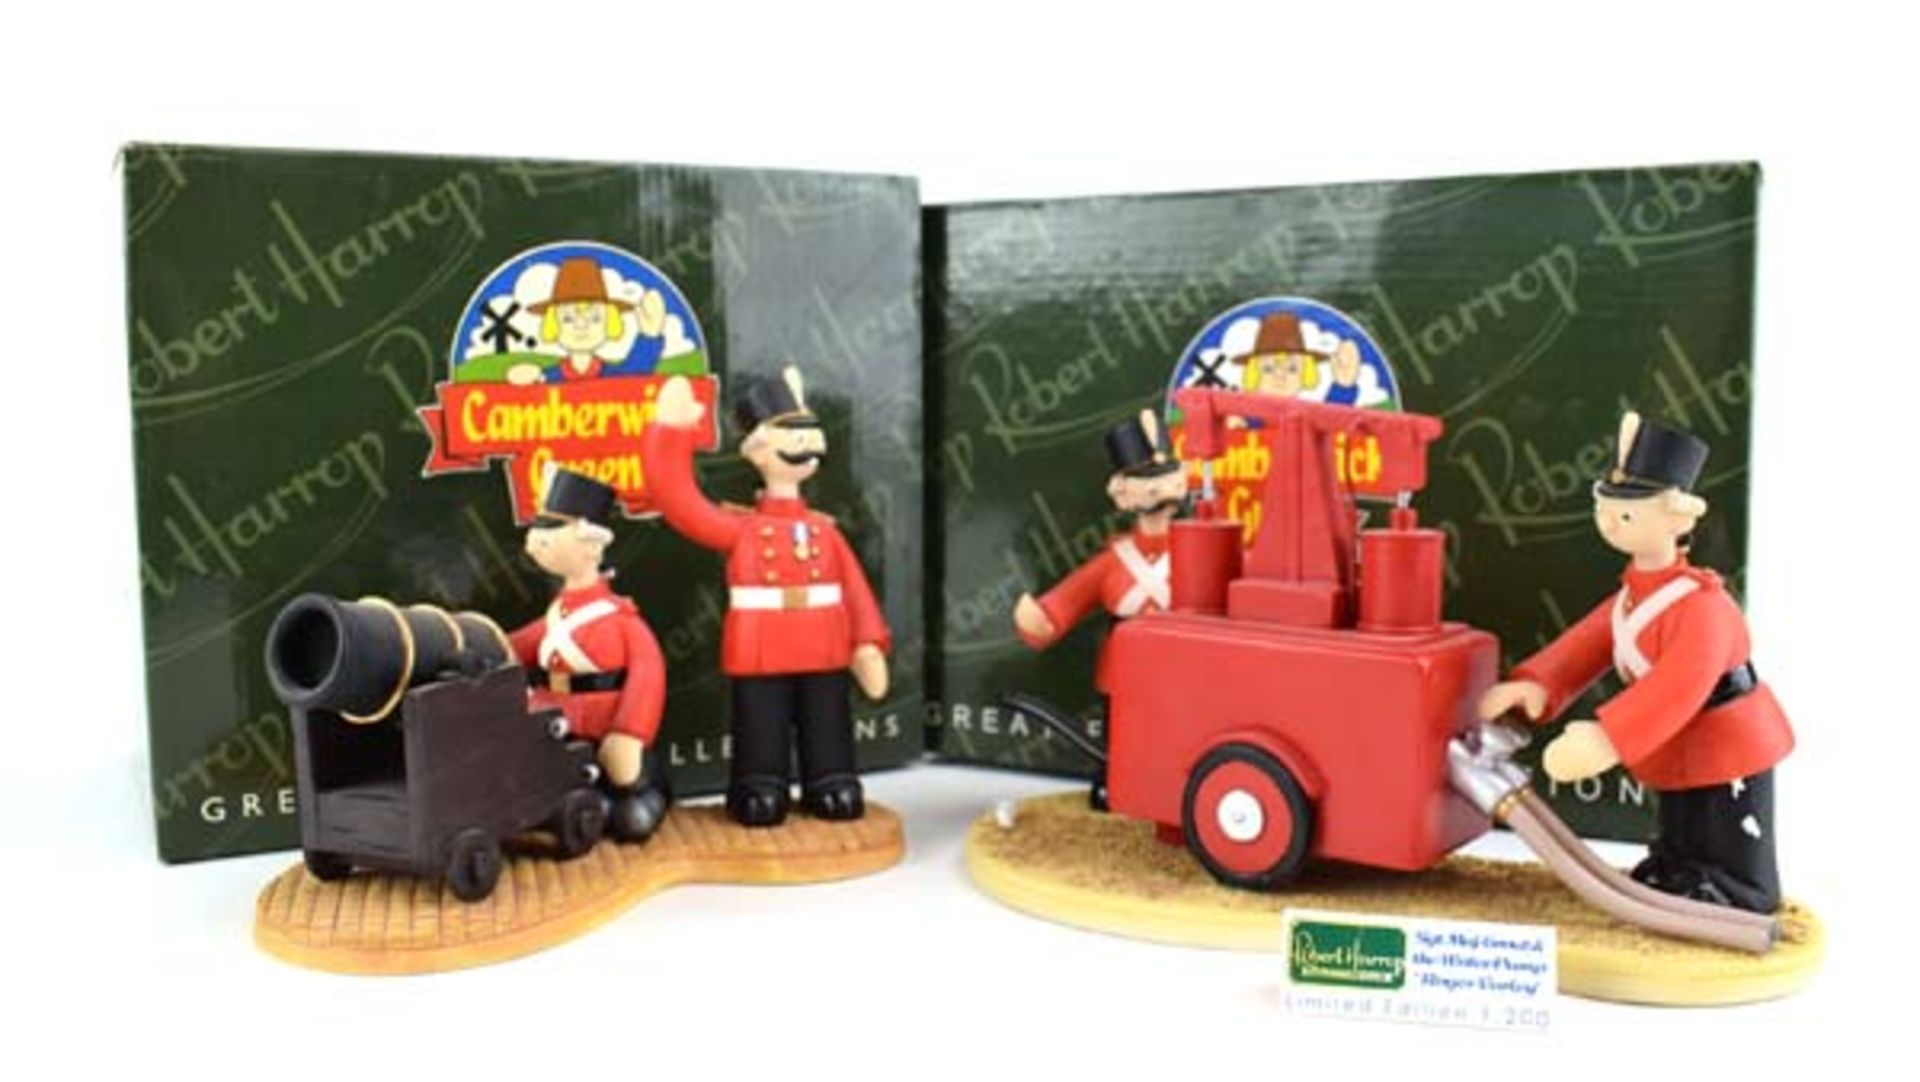 Two Robert Harrop Camberwick Green figures: CGYP07 Sergeant Major Grout and the Water Pump and CGS04